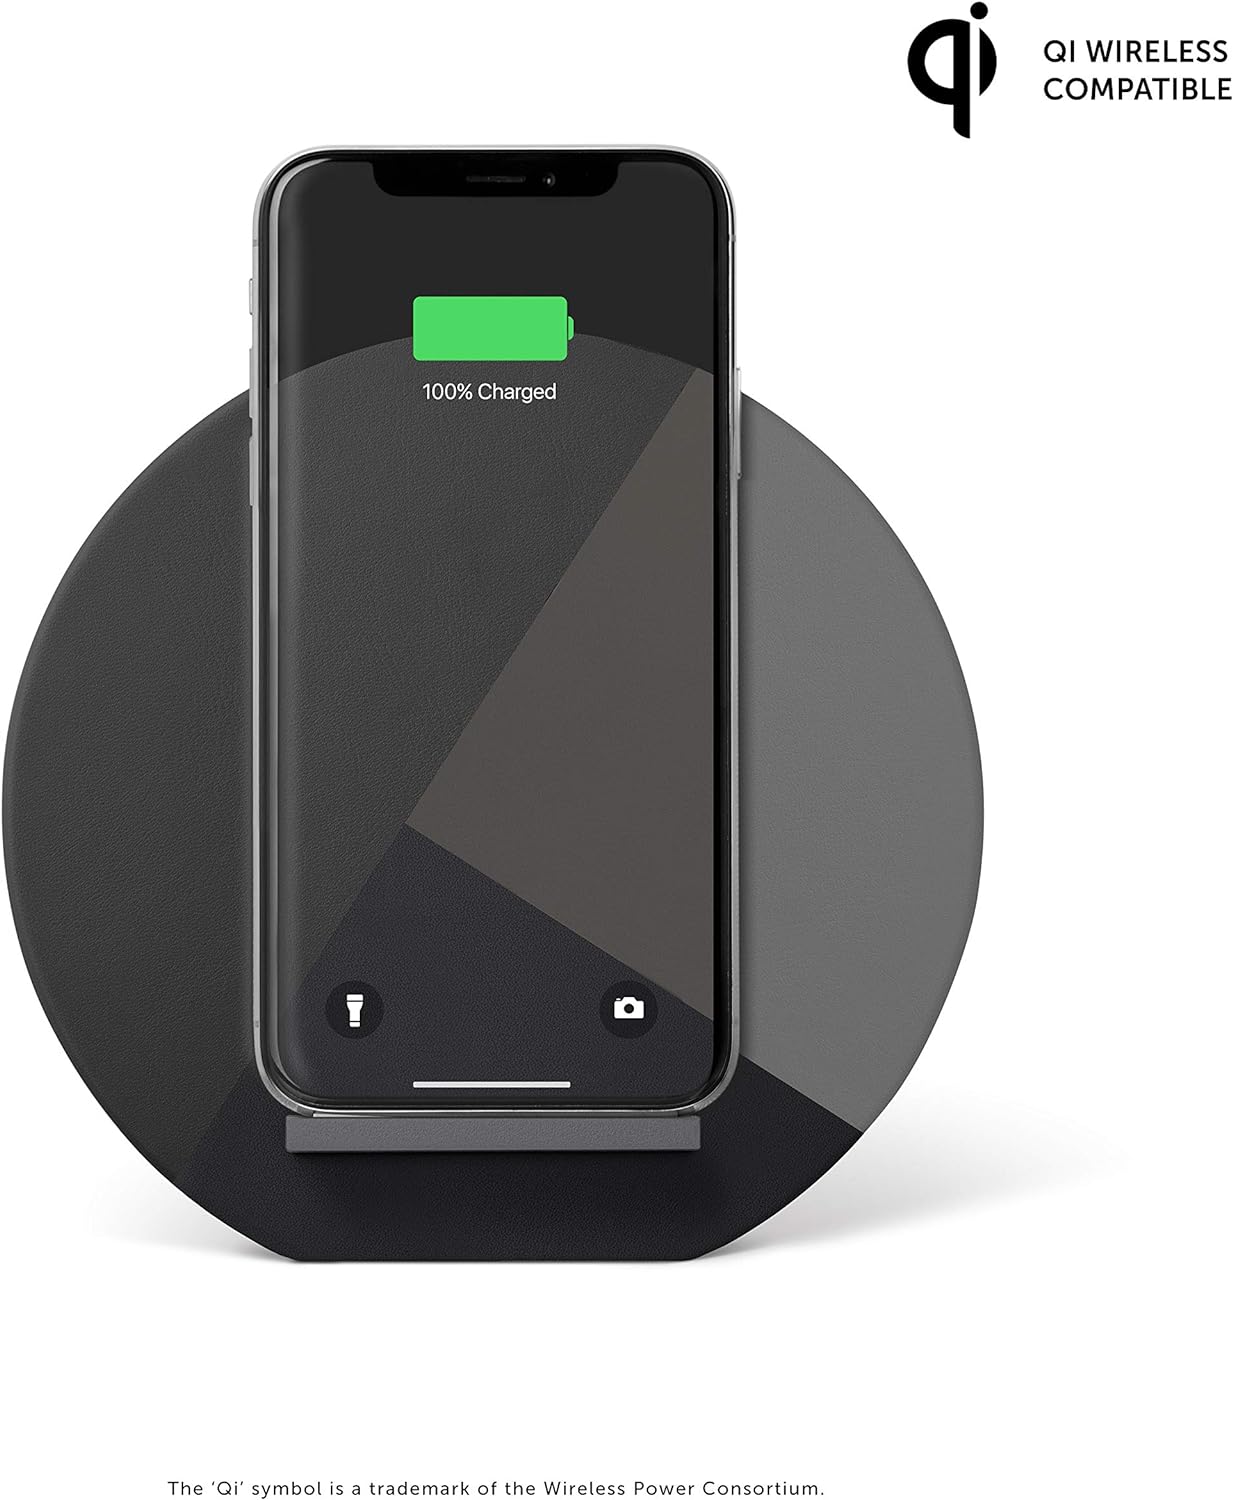 Native Union Dock Marquetry Wireless Charger\u2013Genuine Italian Leather High Speed [Qi Certified] 10W Versatile Fast Wireless Charging Stand with iPhone 11\/11Pro\/11Pro Max(Slate)